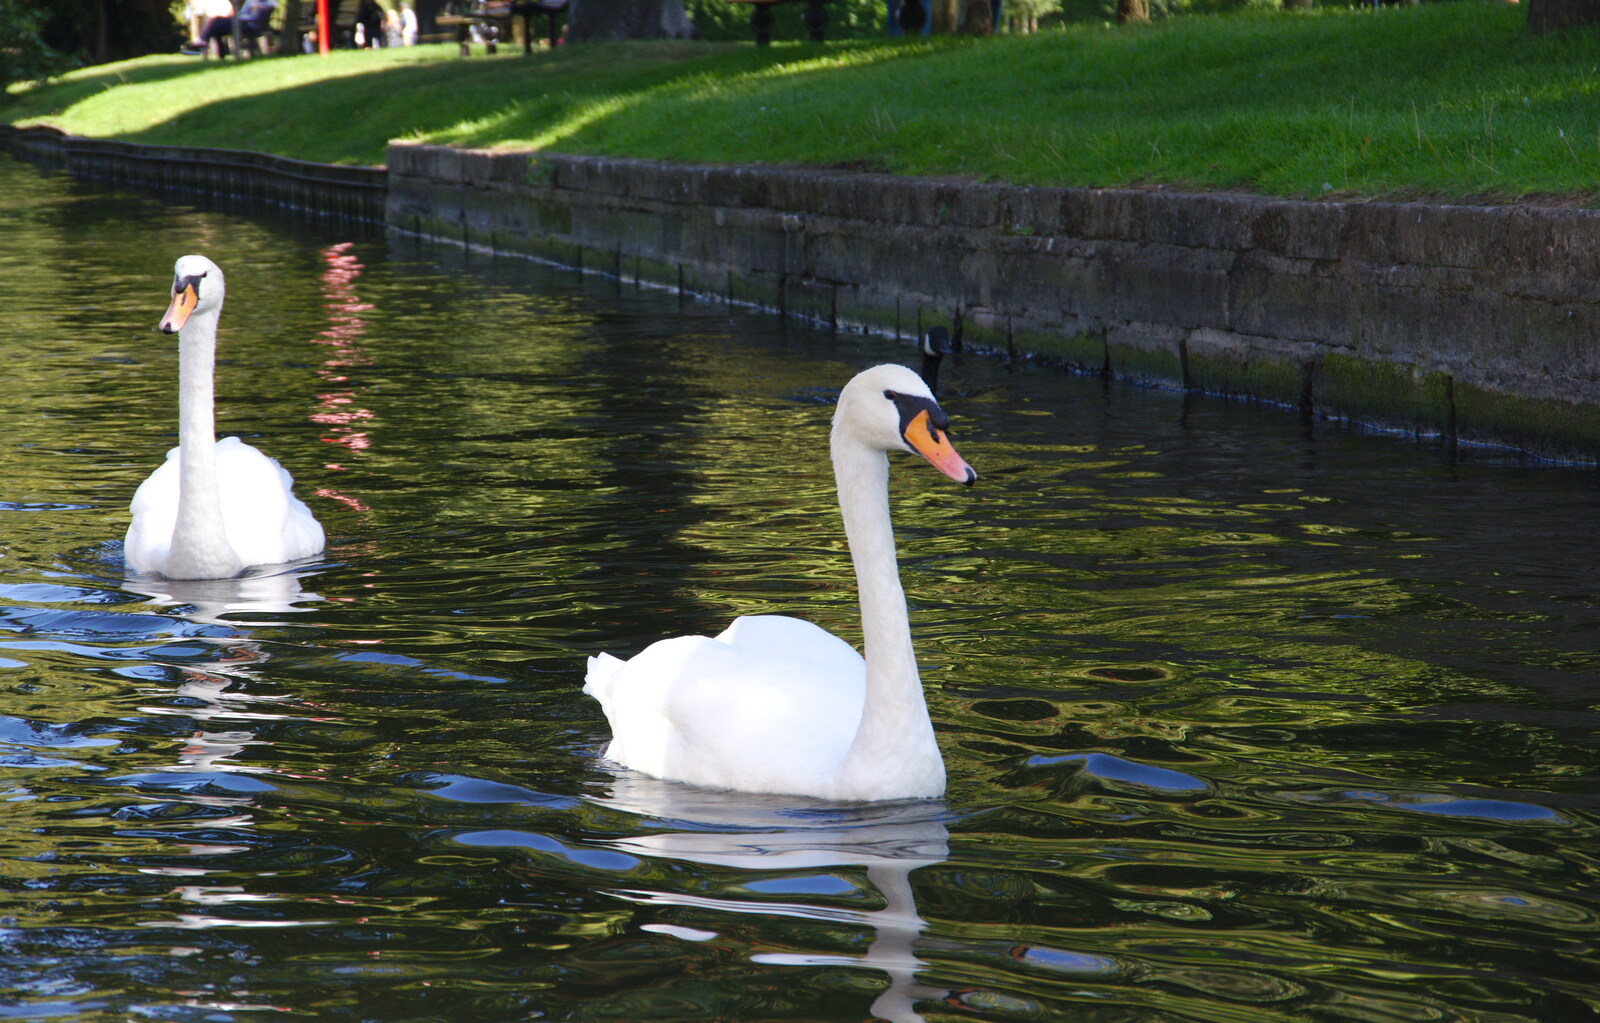 These swans have attitude from A Boat Trip on the River, Stratford upon Avon, Warwickshire - 14th September 2019